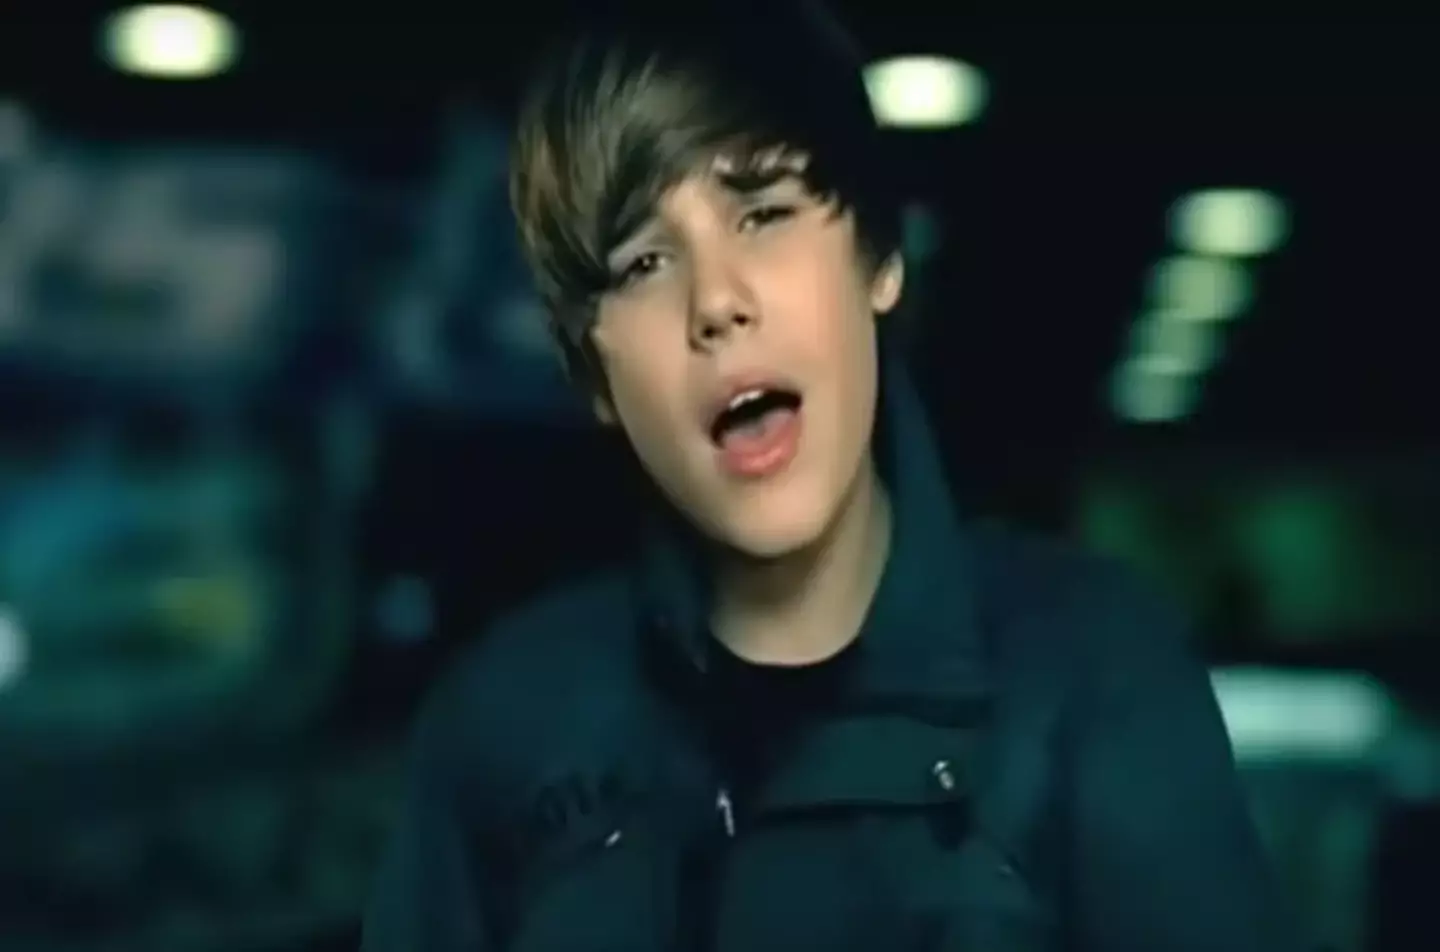 Justin Bieber's 'Baby' was released 14 years ago and fans reckon it's going to make a comeback. (Island)